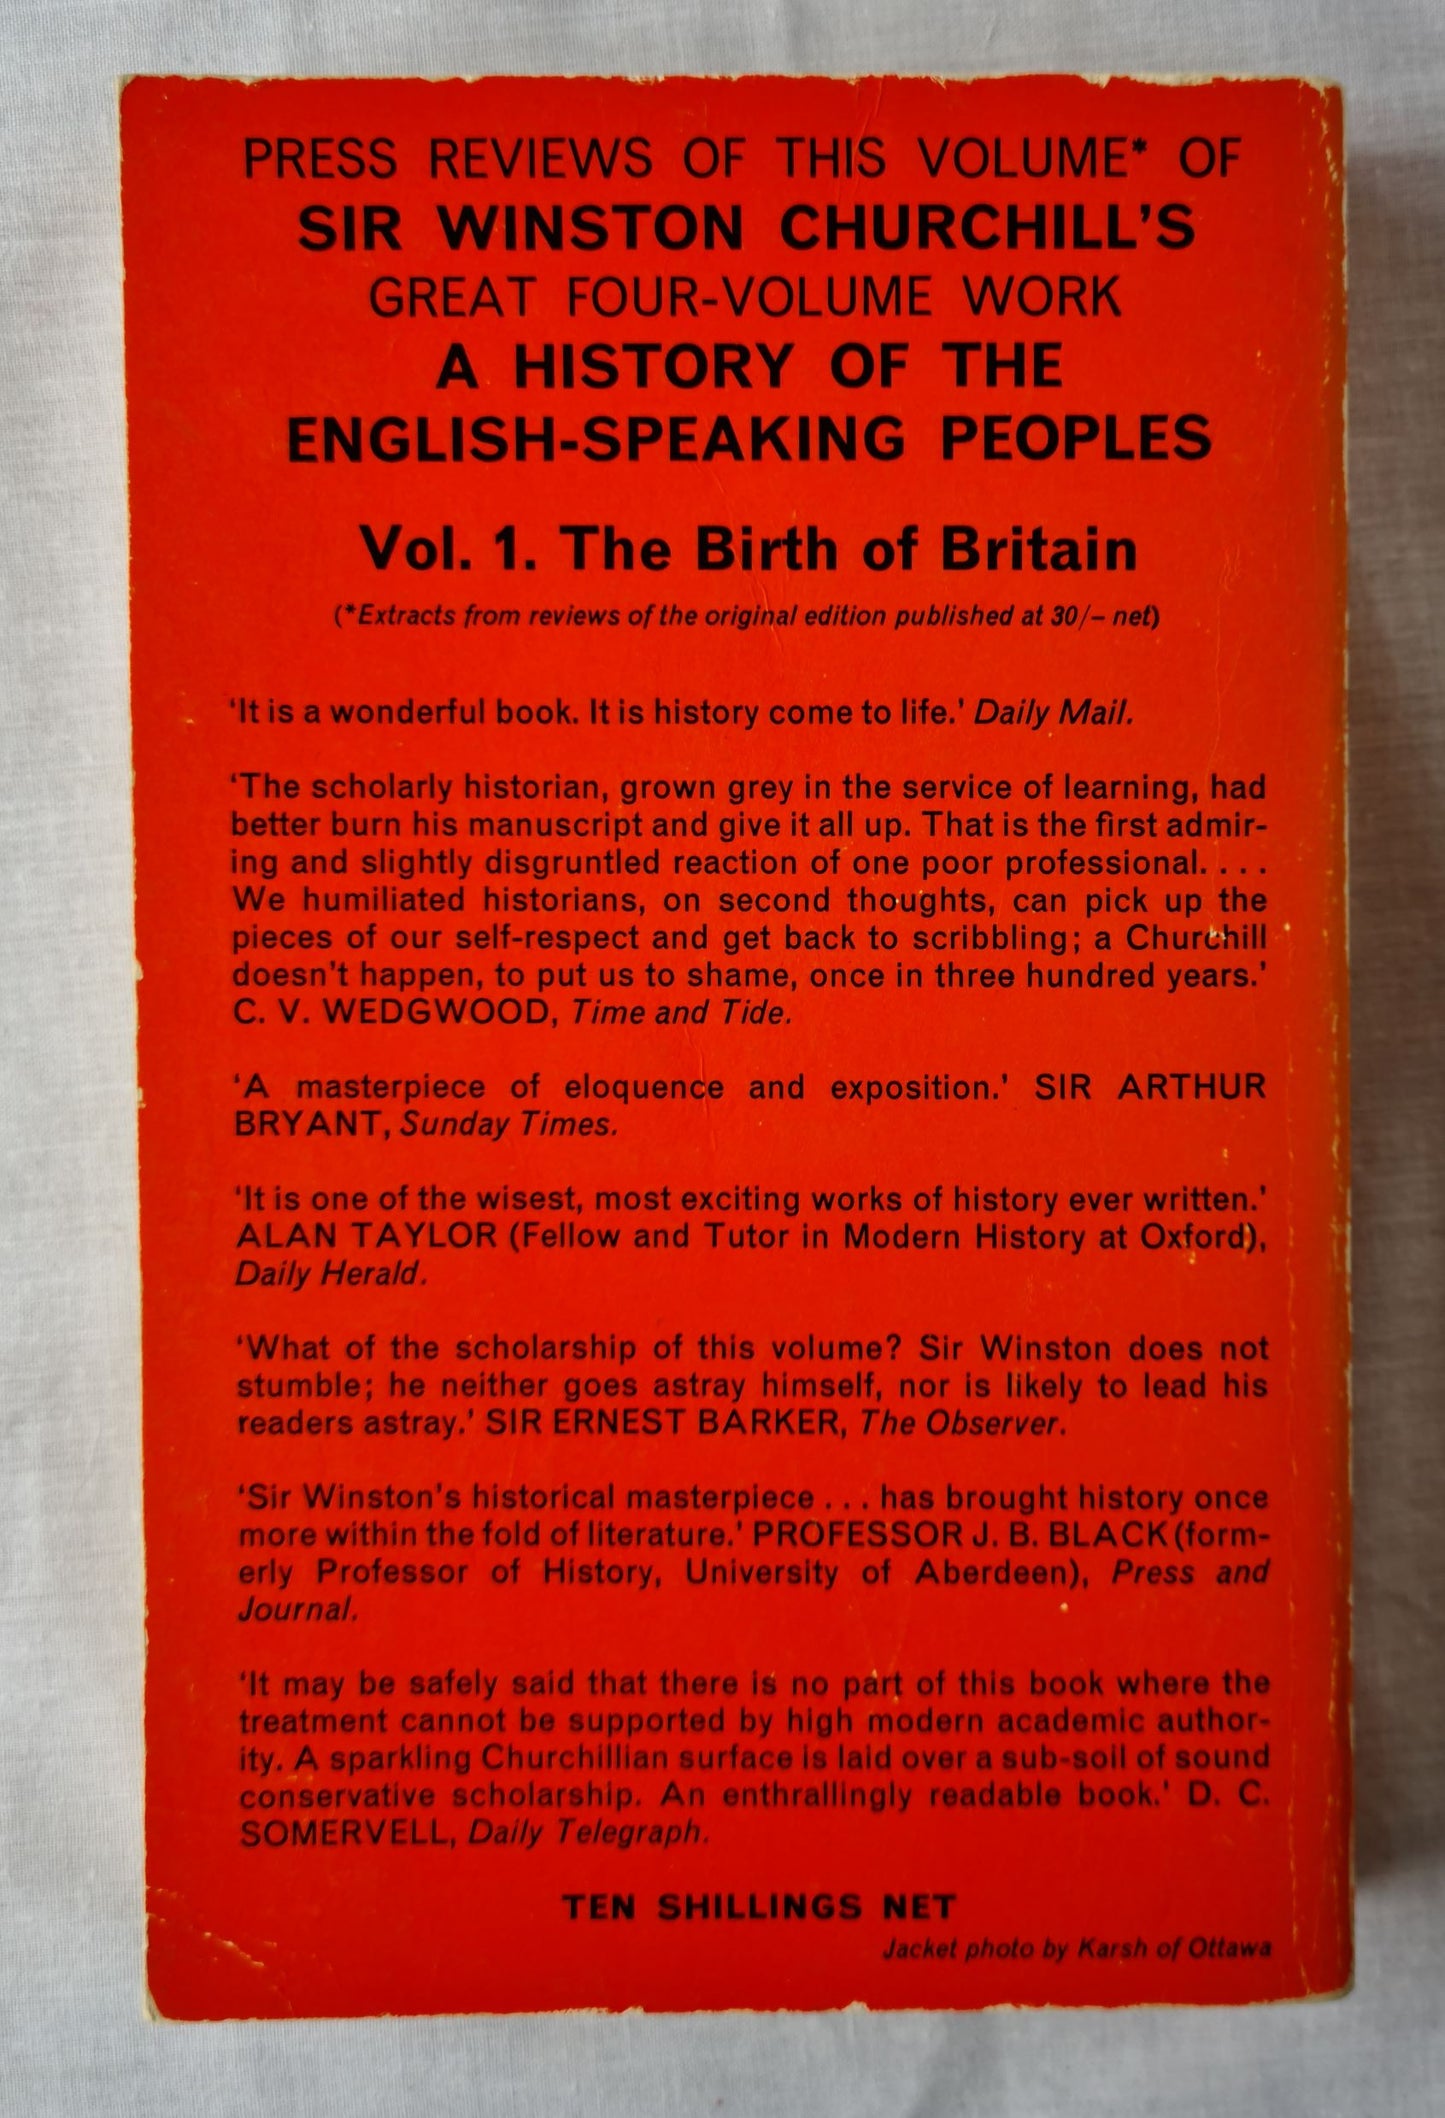 A History of the English-Speaking Peoples by Winston S. Churchill